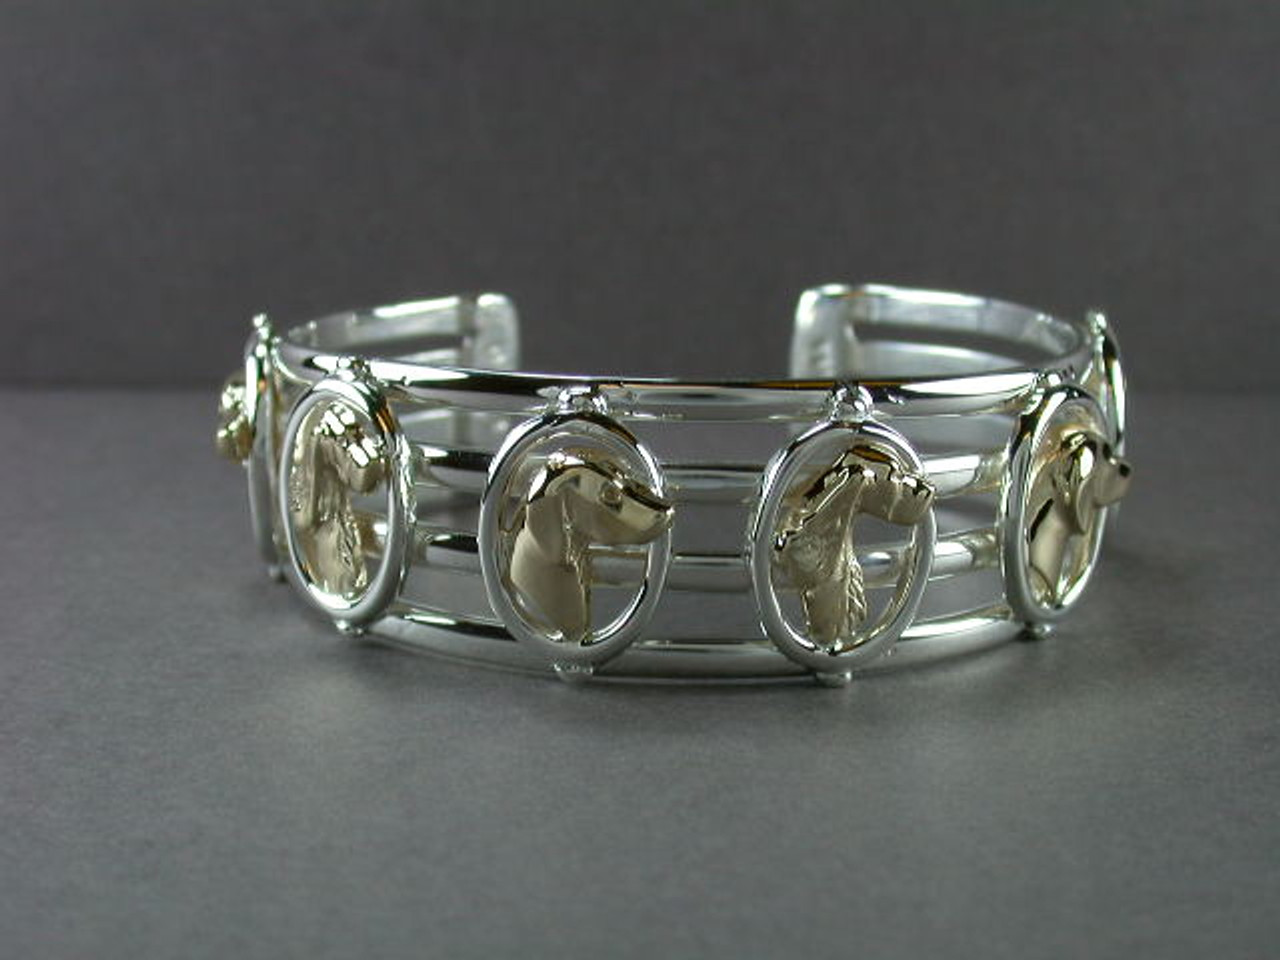 Bracelet Cuff 4 Bar With Different Breeds